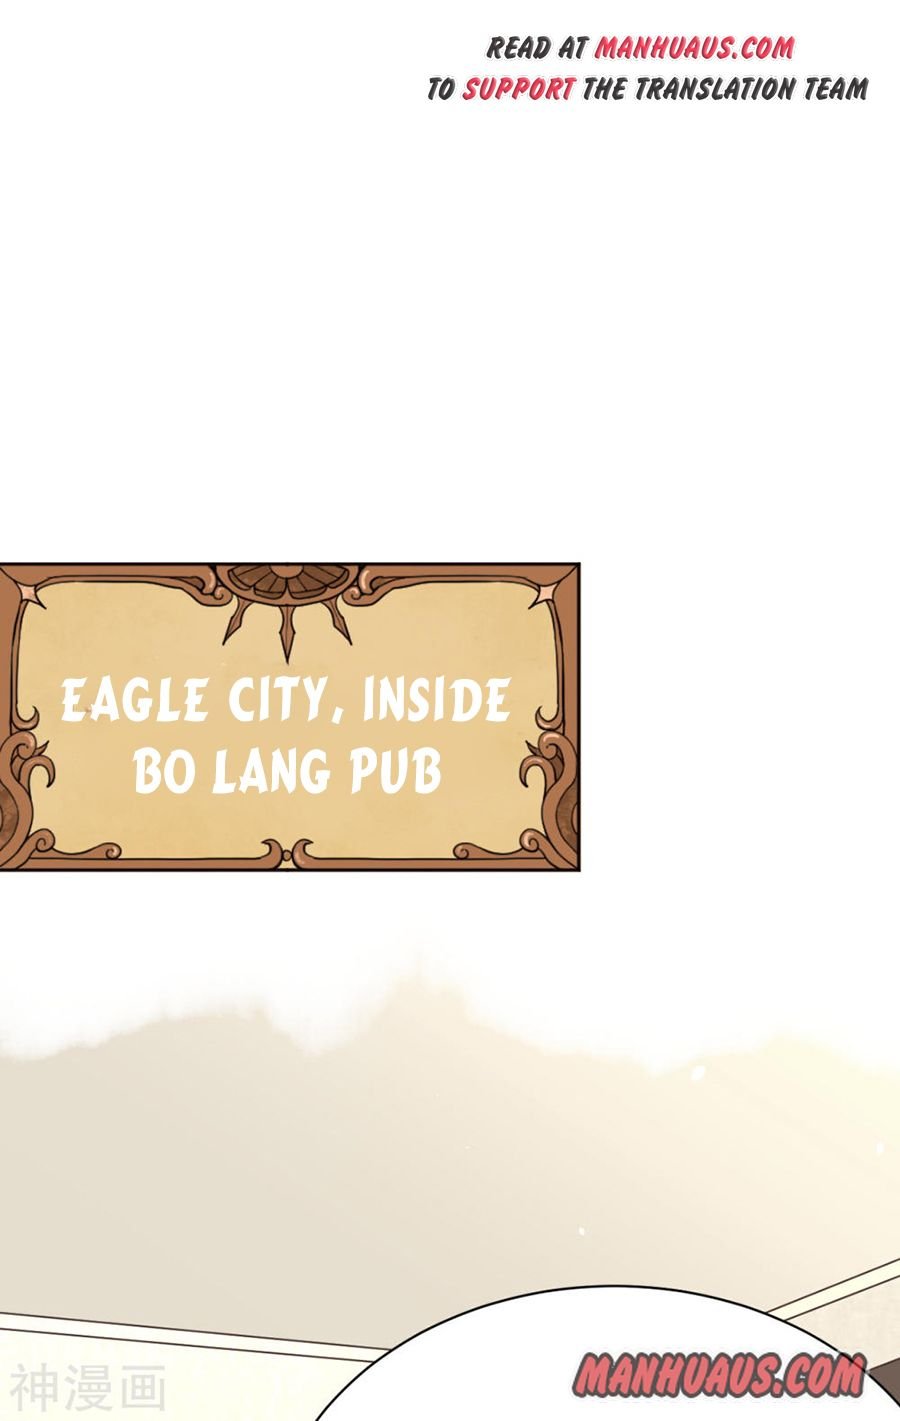 Starting From Today I'll Work As A City Lord - Page 1